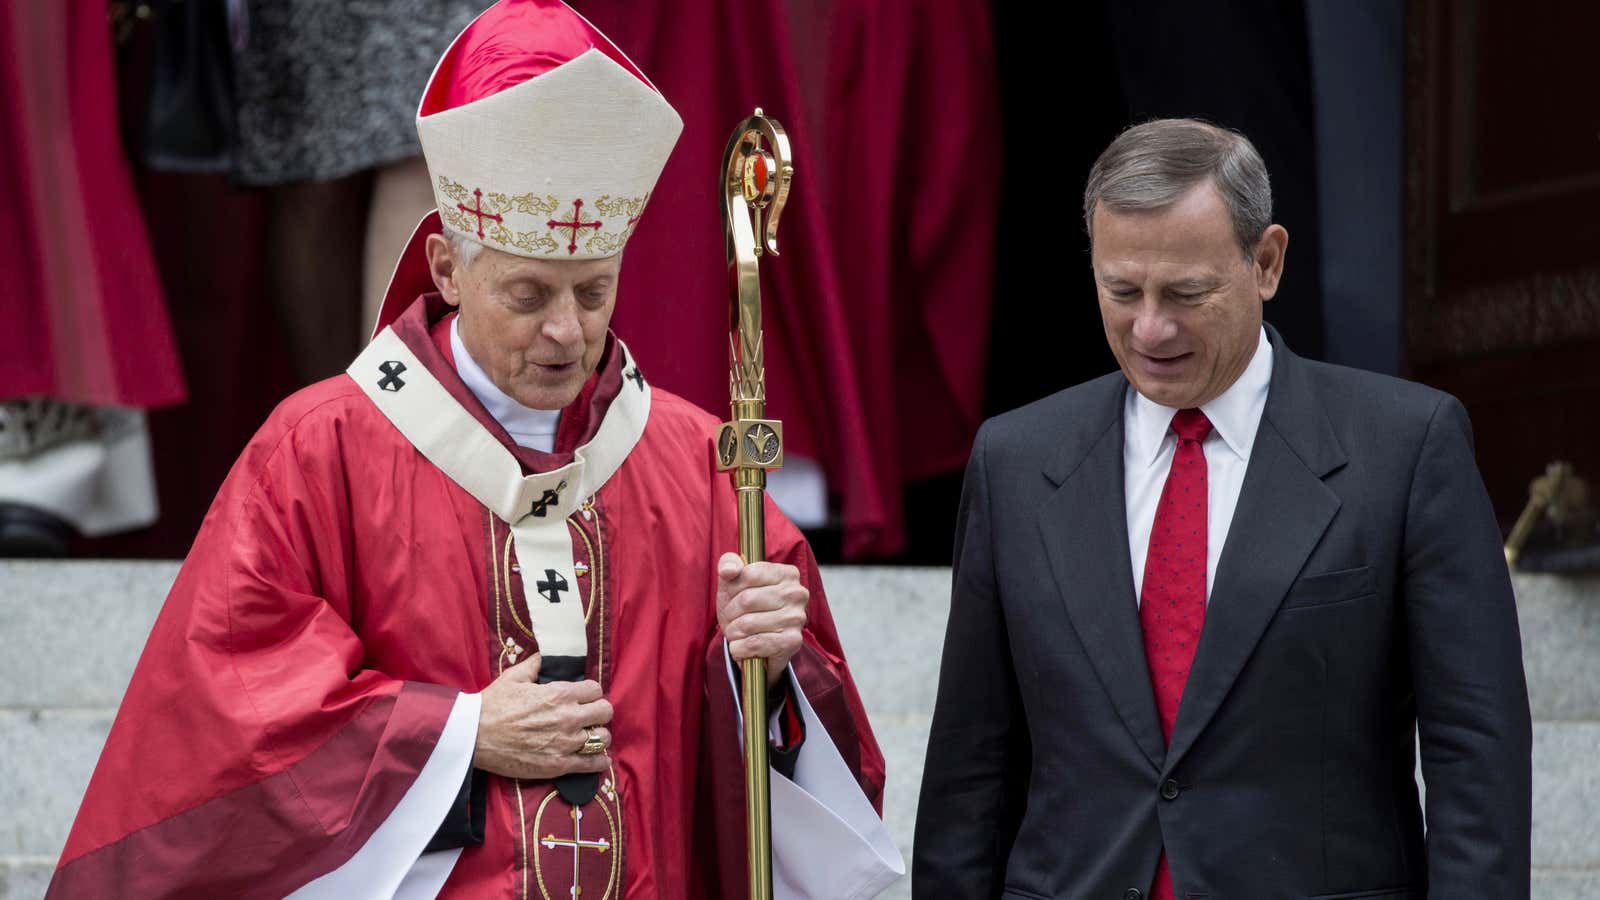 Supreme Court Chief Justice John Roberts (R) speaks with Cardinal Donald Wuerl (L), archbishop of Washington on October 4, 2015.